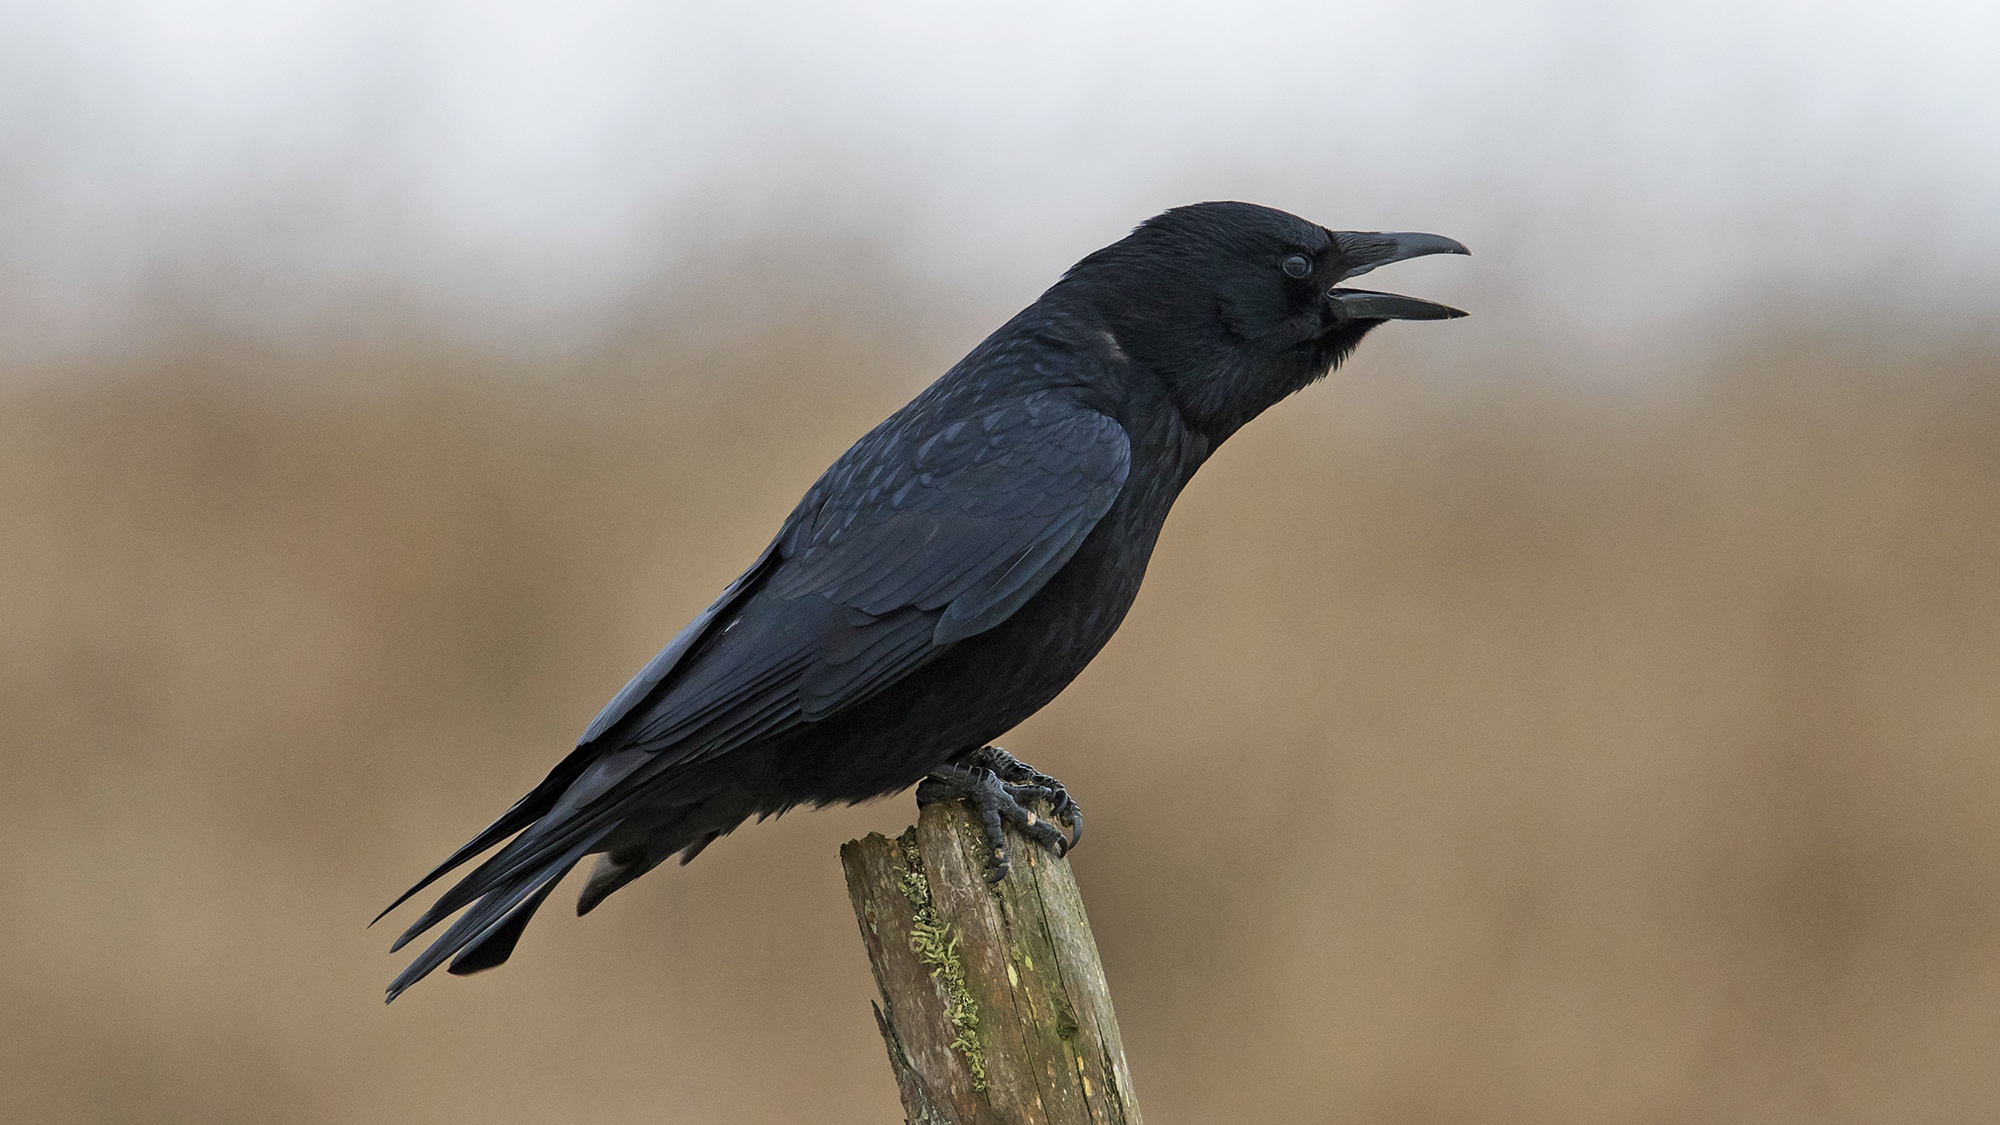 The carrion crow, Corvus corone, perched on a wooden fence post while calling. (Photo by: Sven-Erik Arndt/Arterra/Universal Images Group via Getty Images)